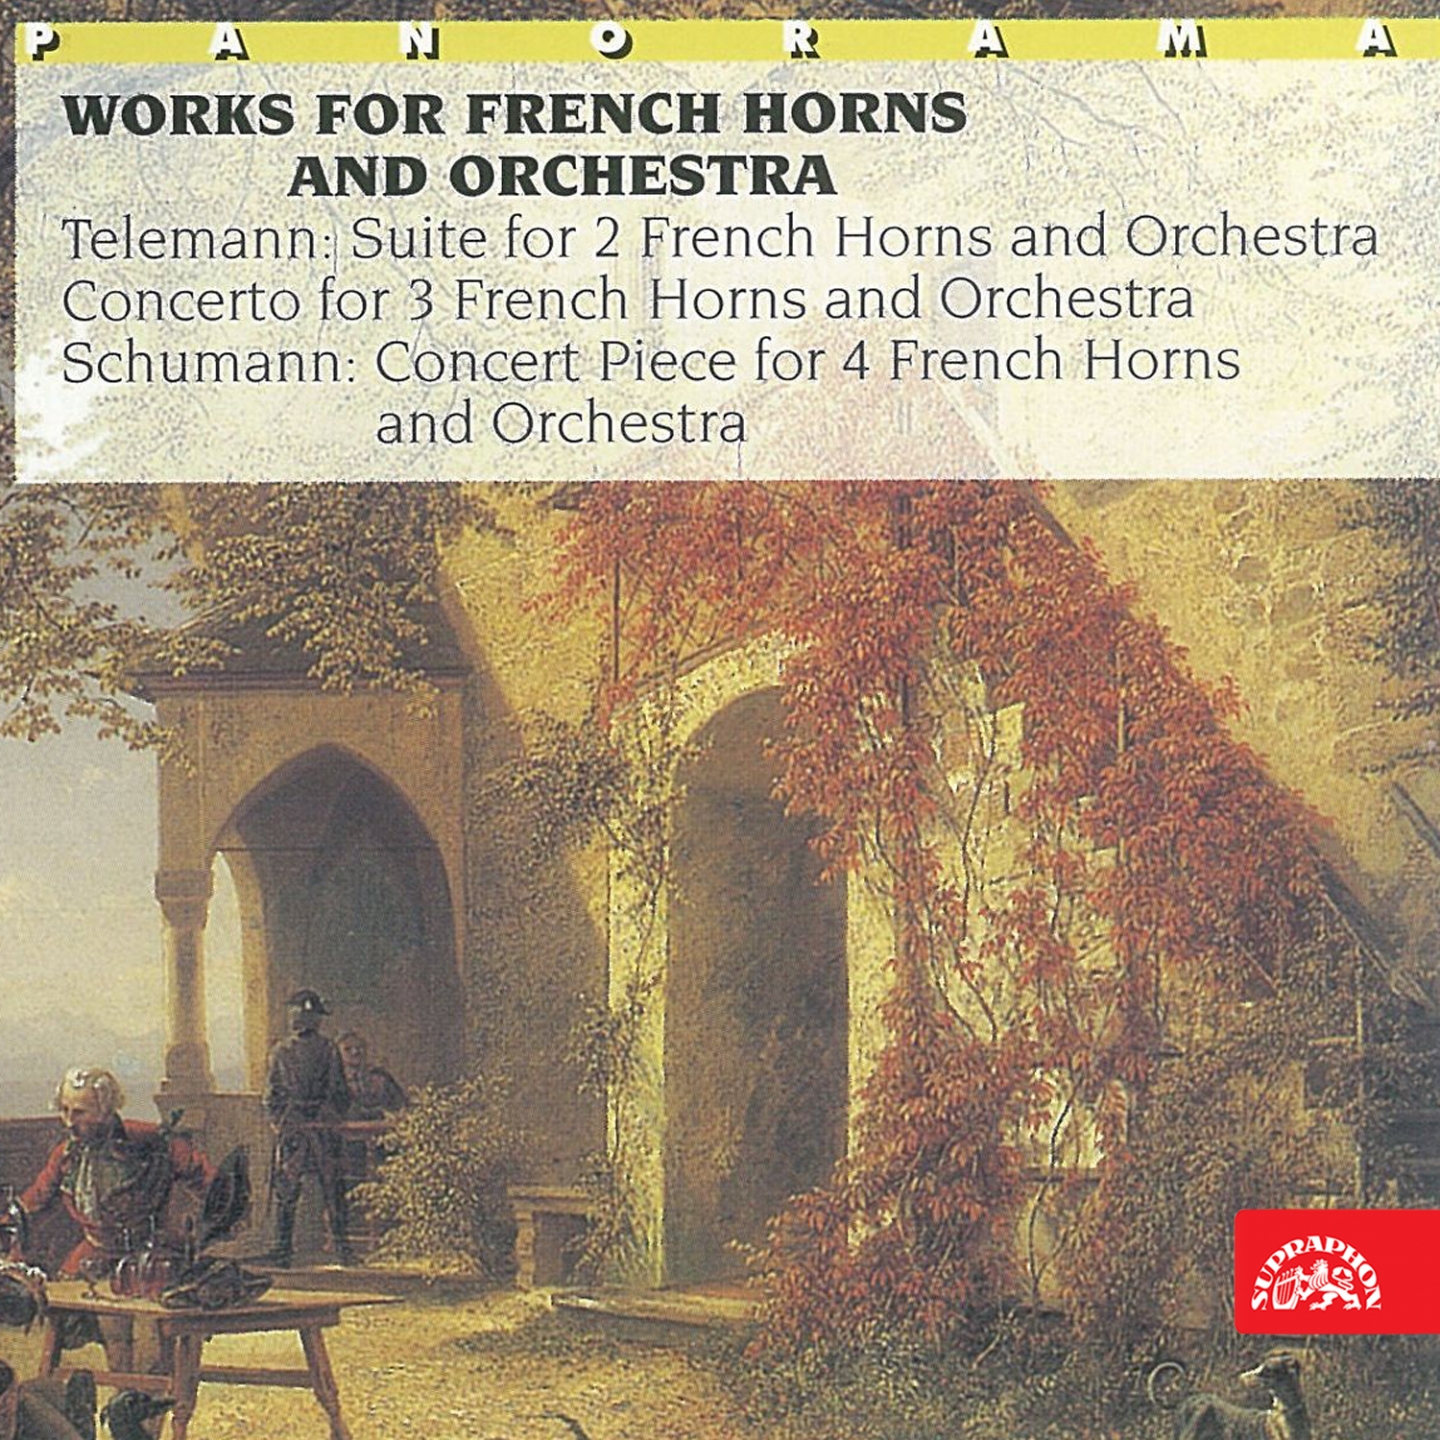 Telemann, Schumann: Works for French Horns and Orchestra